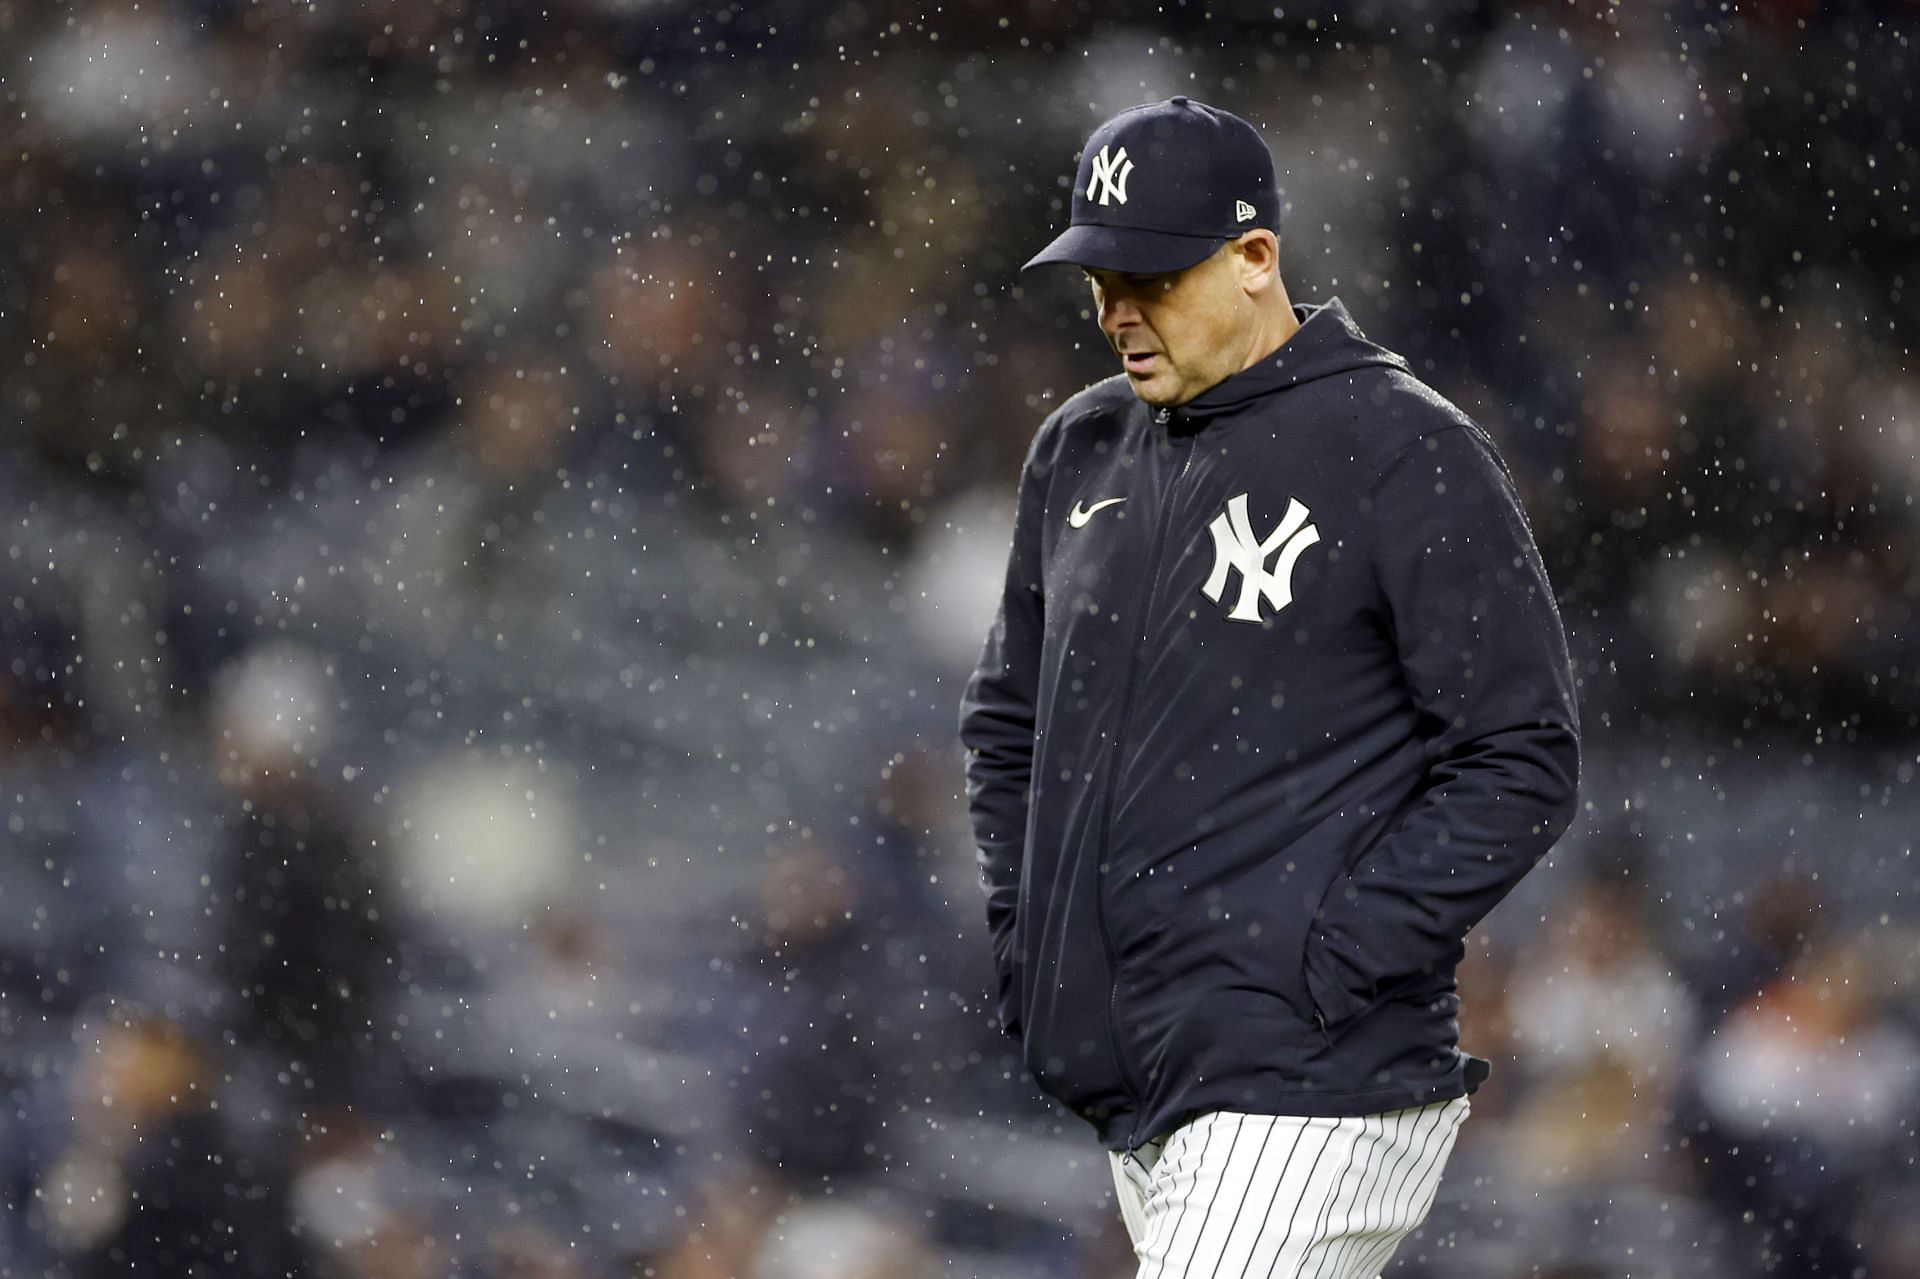 Aaron Boone expressed his desire not to be kicked out of the games.